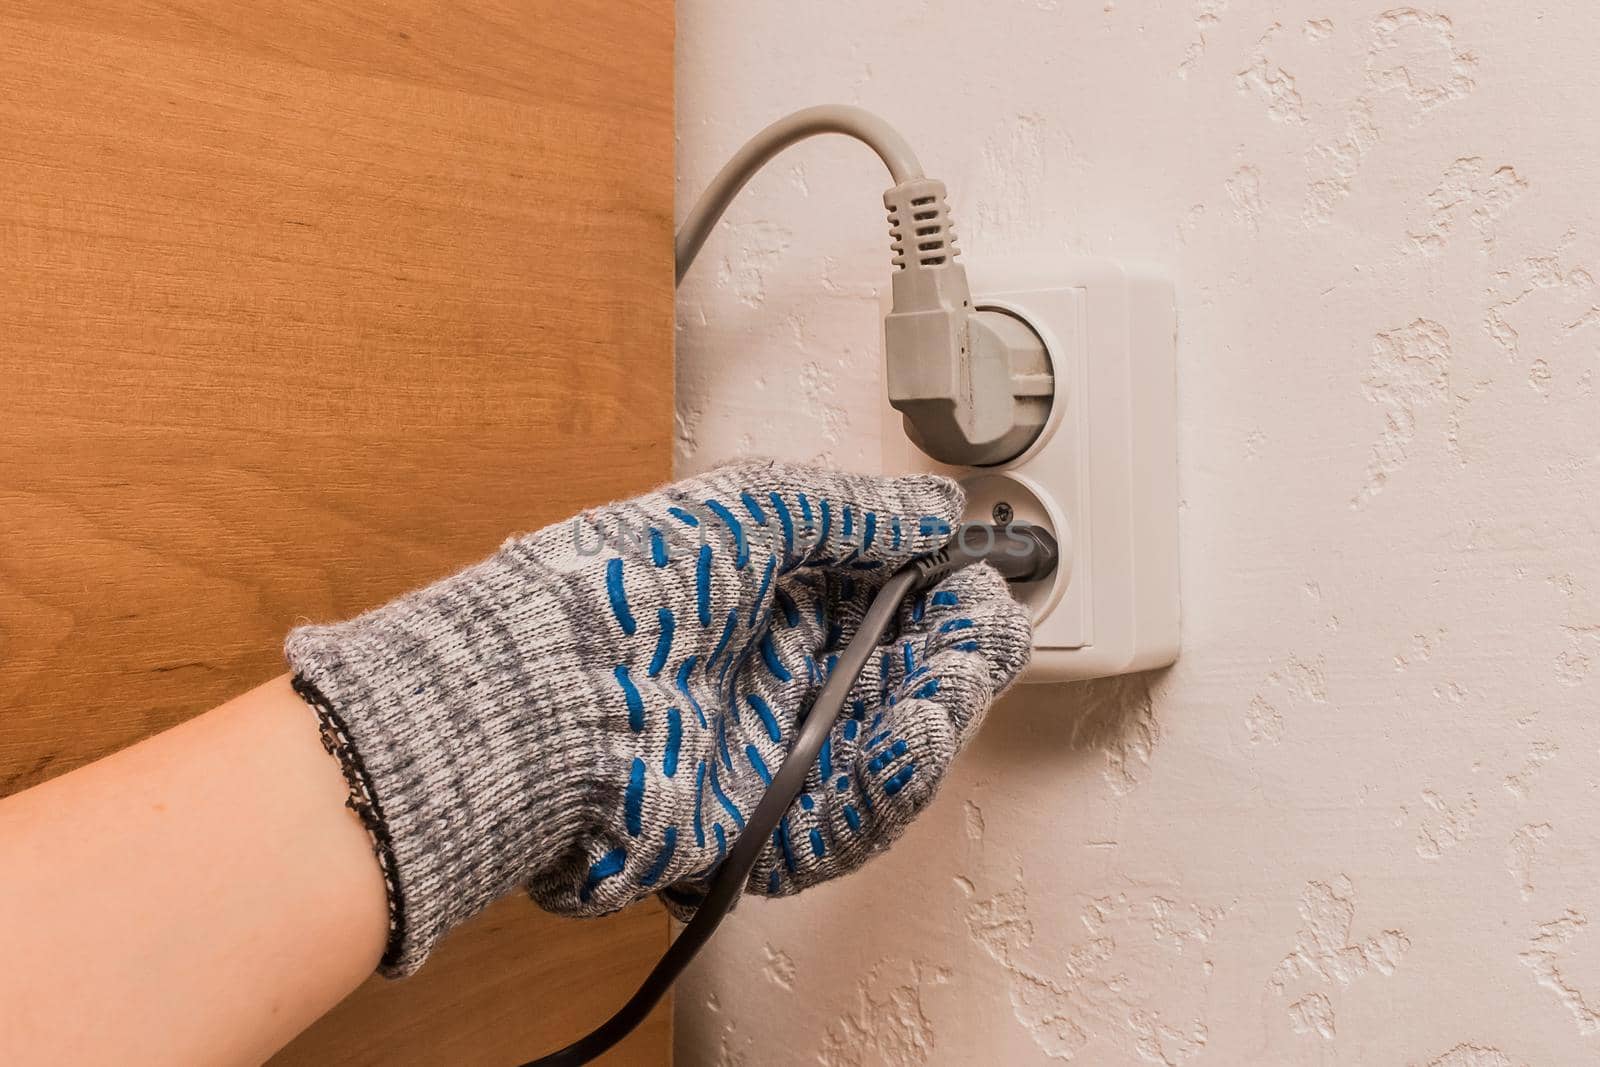 The hand of a male construction worker in protective gloves connects a plug to a double socket against the background of a wall.